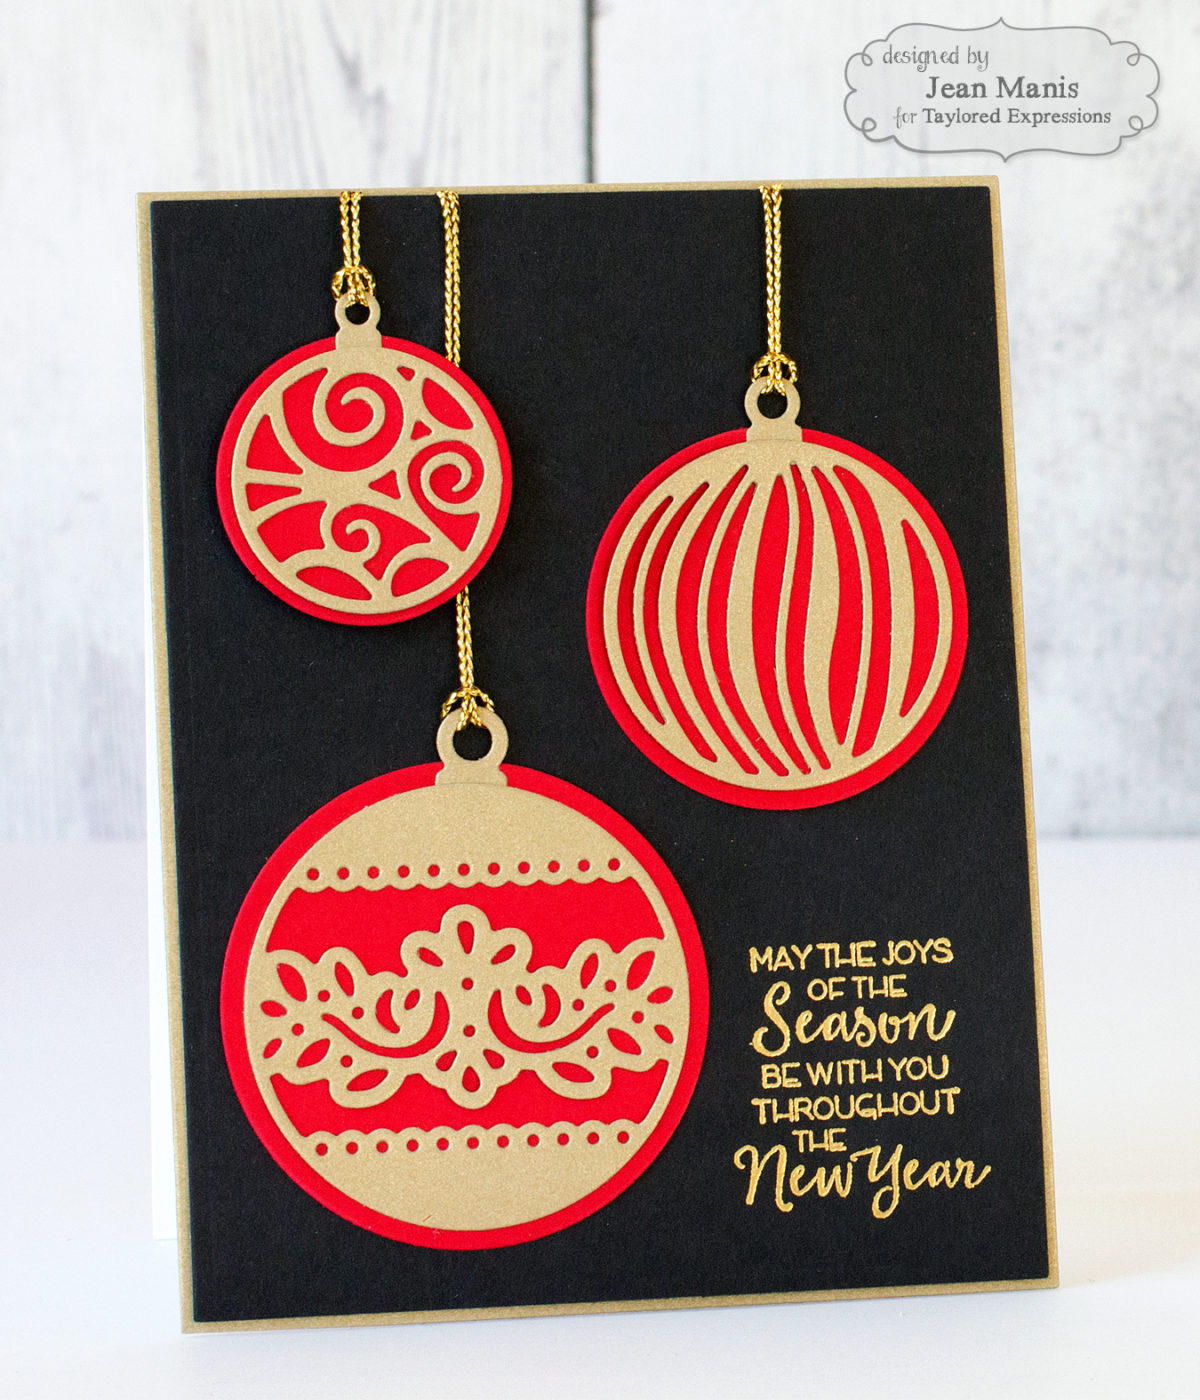 TE Christmas Ornaments – One Design, Two Versions